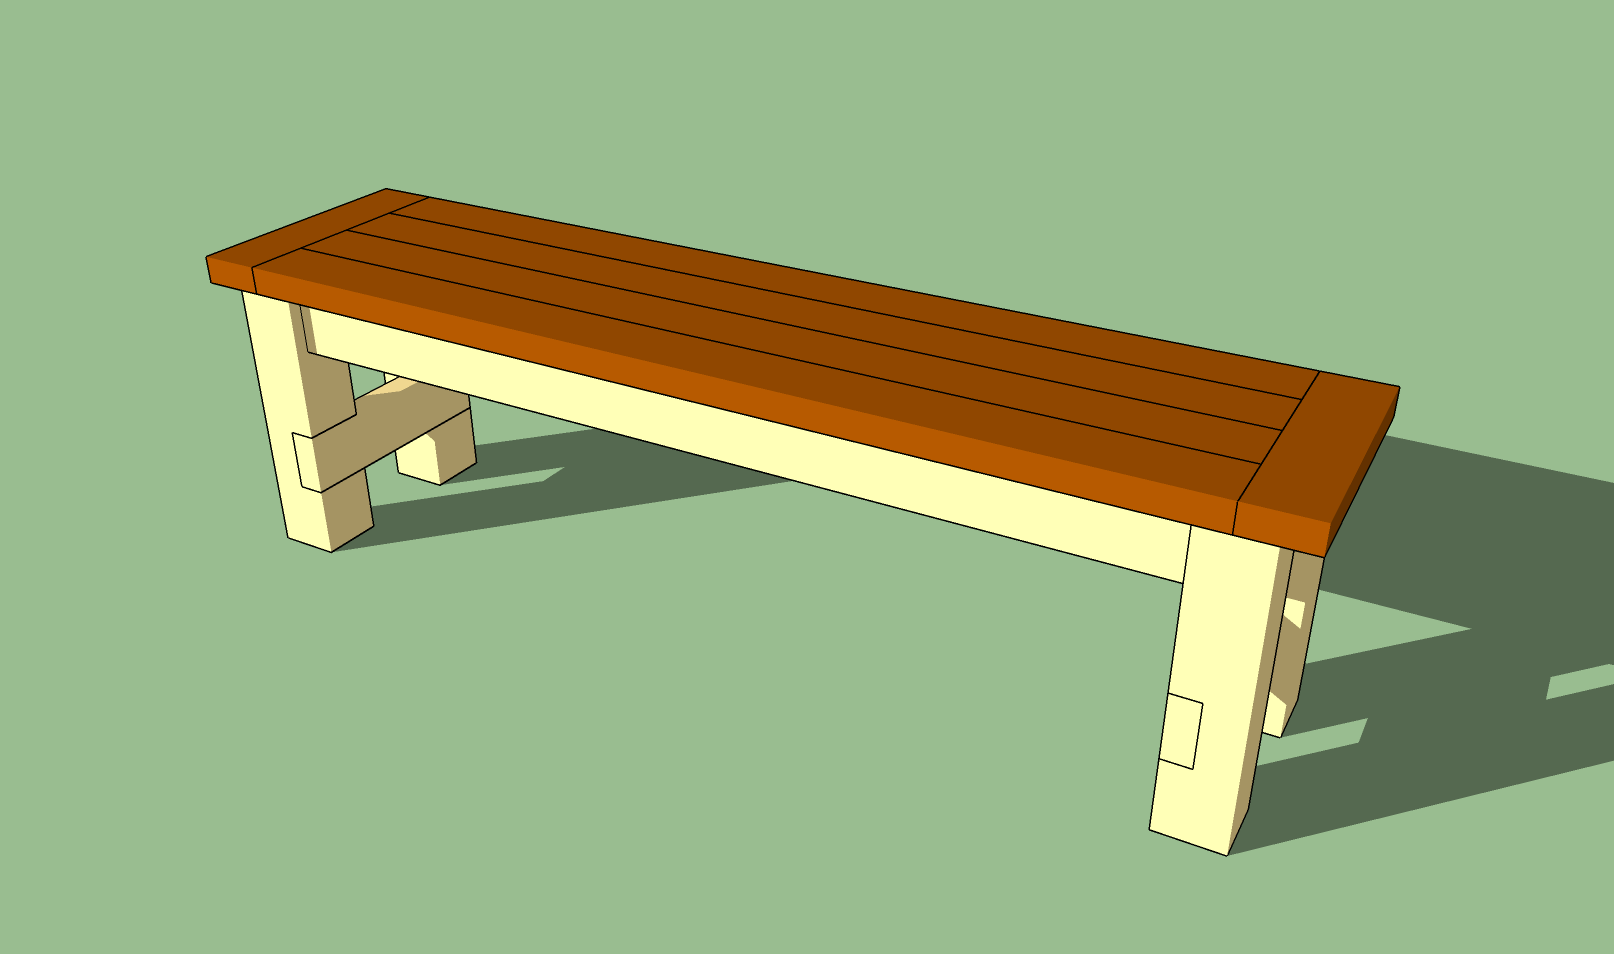 How to Make Simple Timber Bench (DIY)